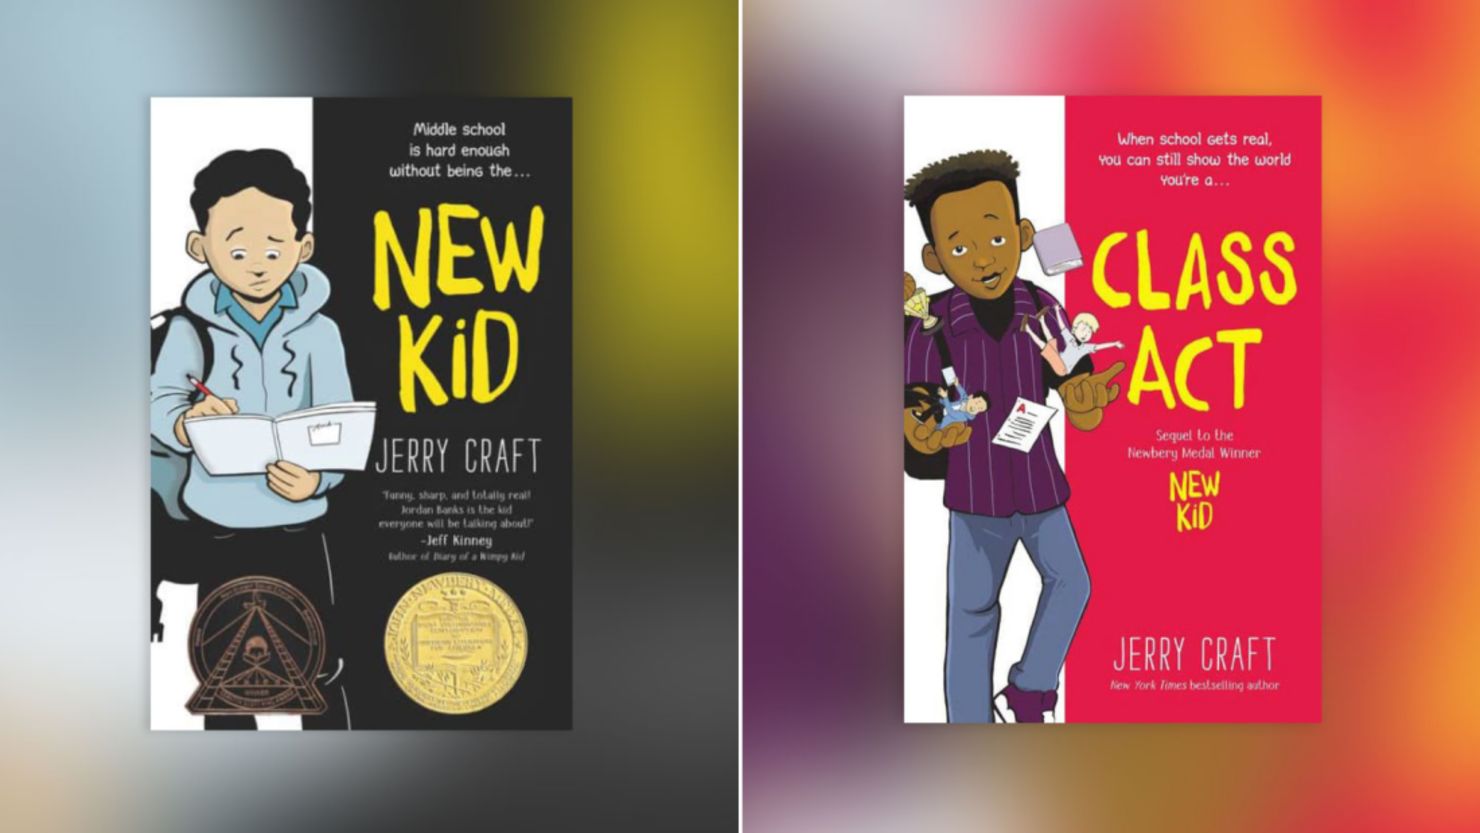 "New Kid" and "Class Act" are two of Jerry Craft's books that were taken off Katy ISD library shelves and are currently under review by the district. 